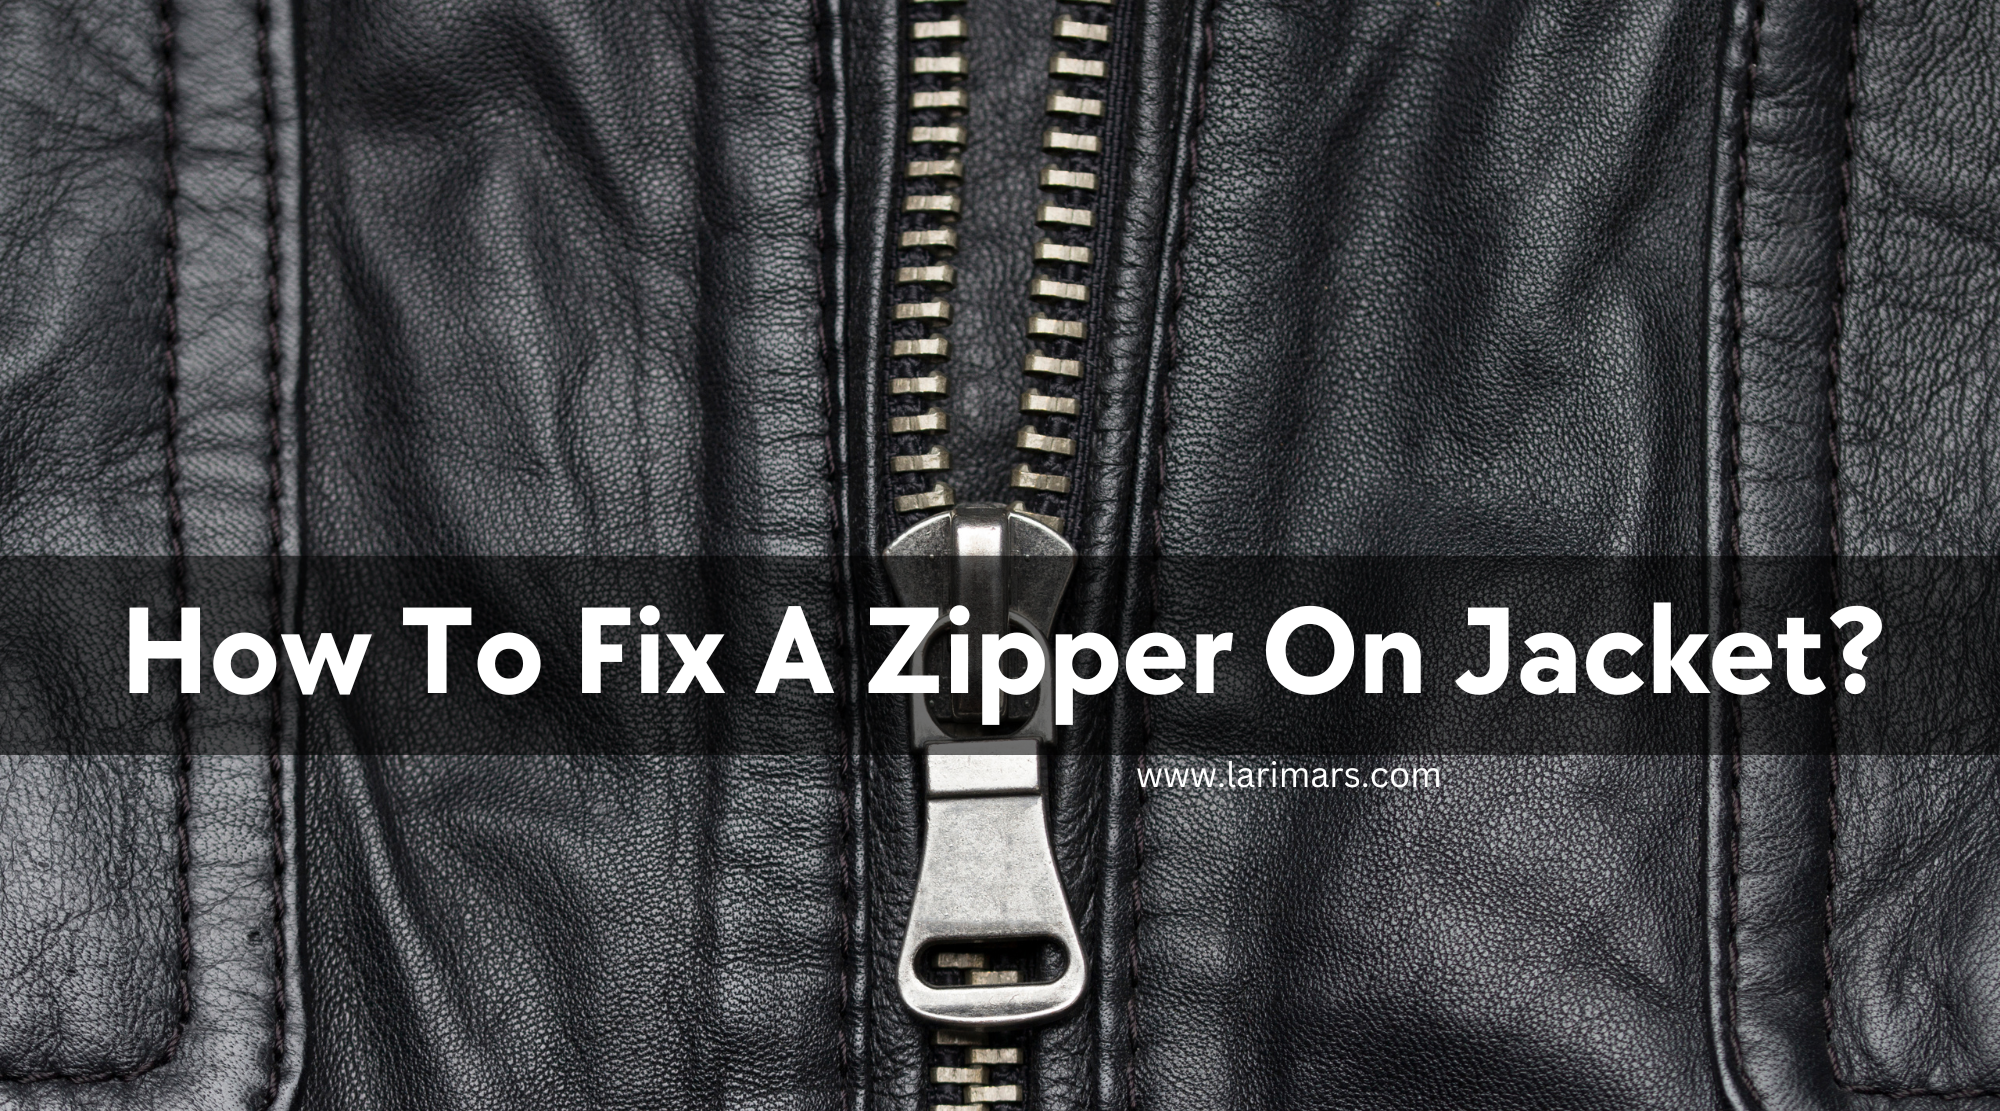 How To Fix A Zipper On Jacket